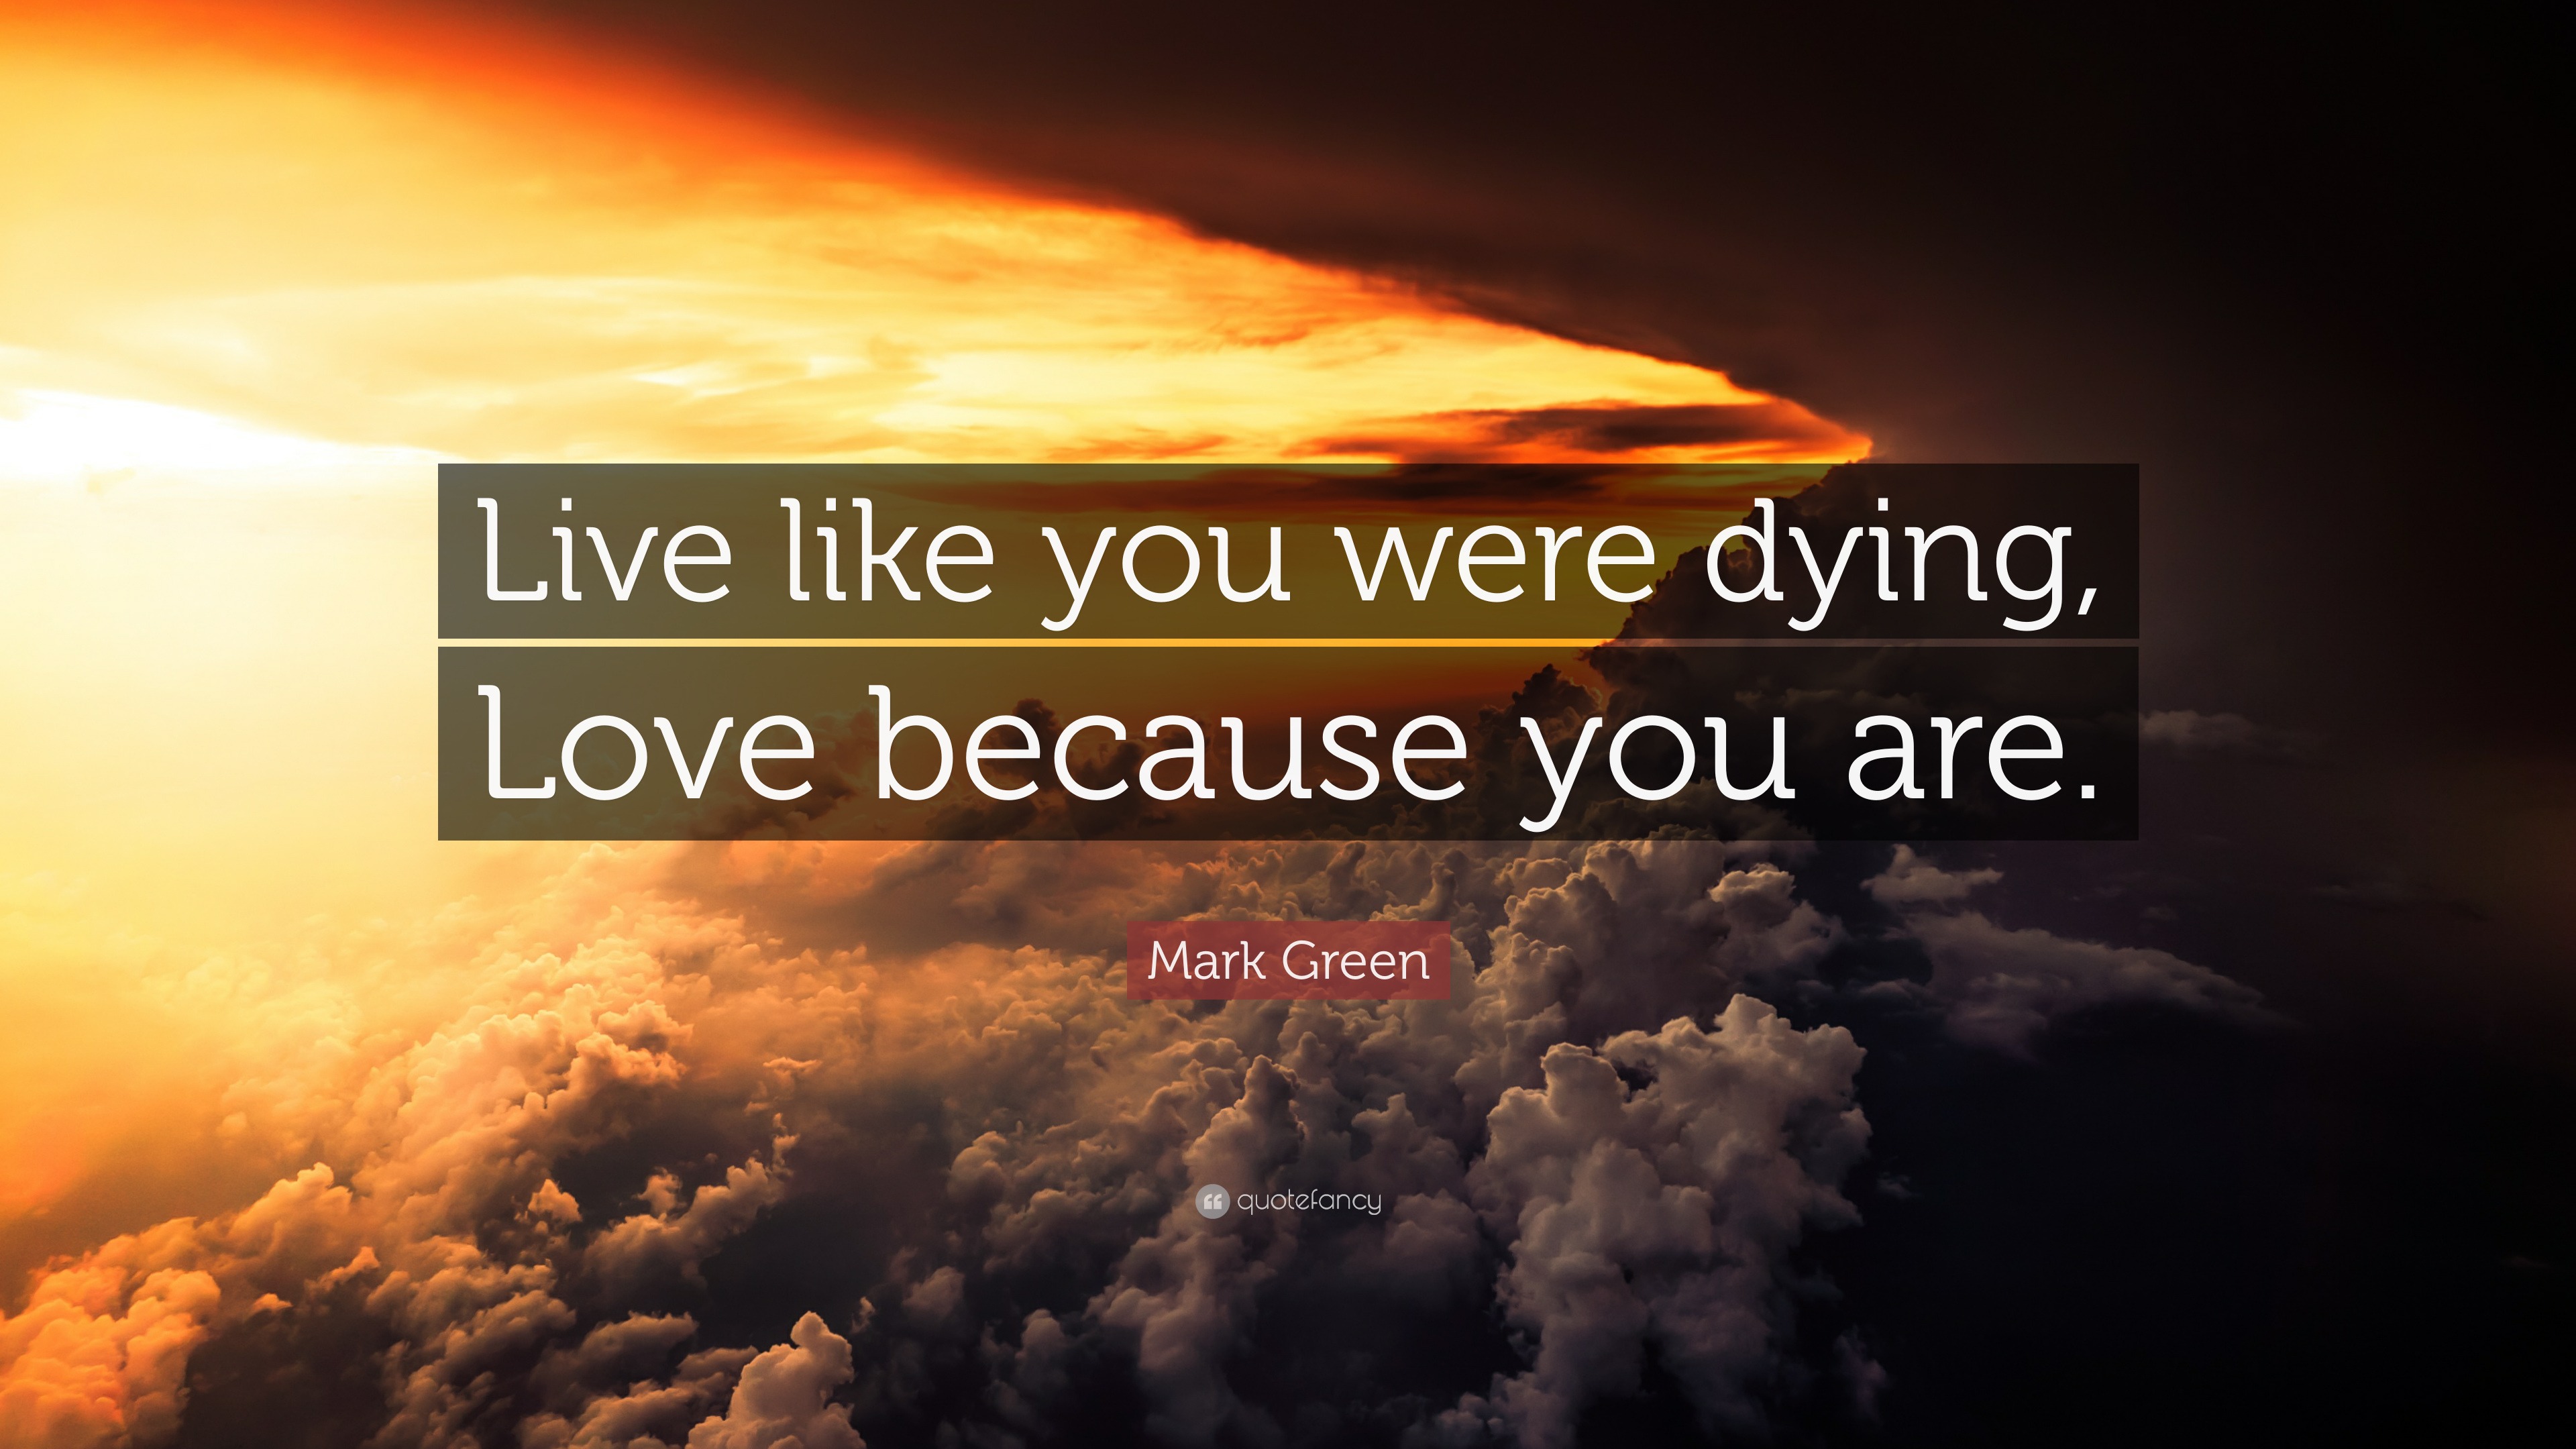 Mark Green Quote: “Live like you were dying, Love because you are.”